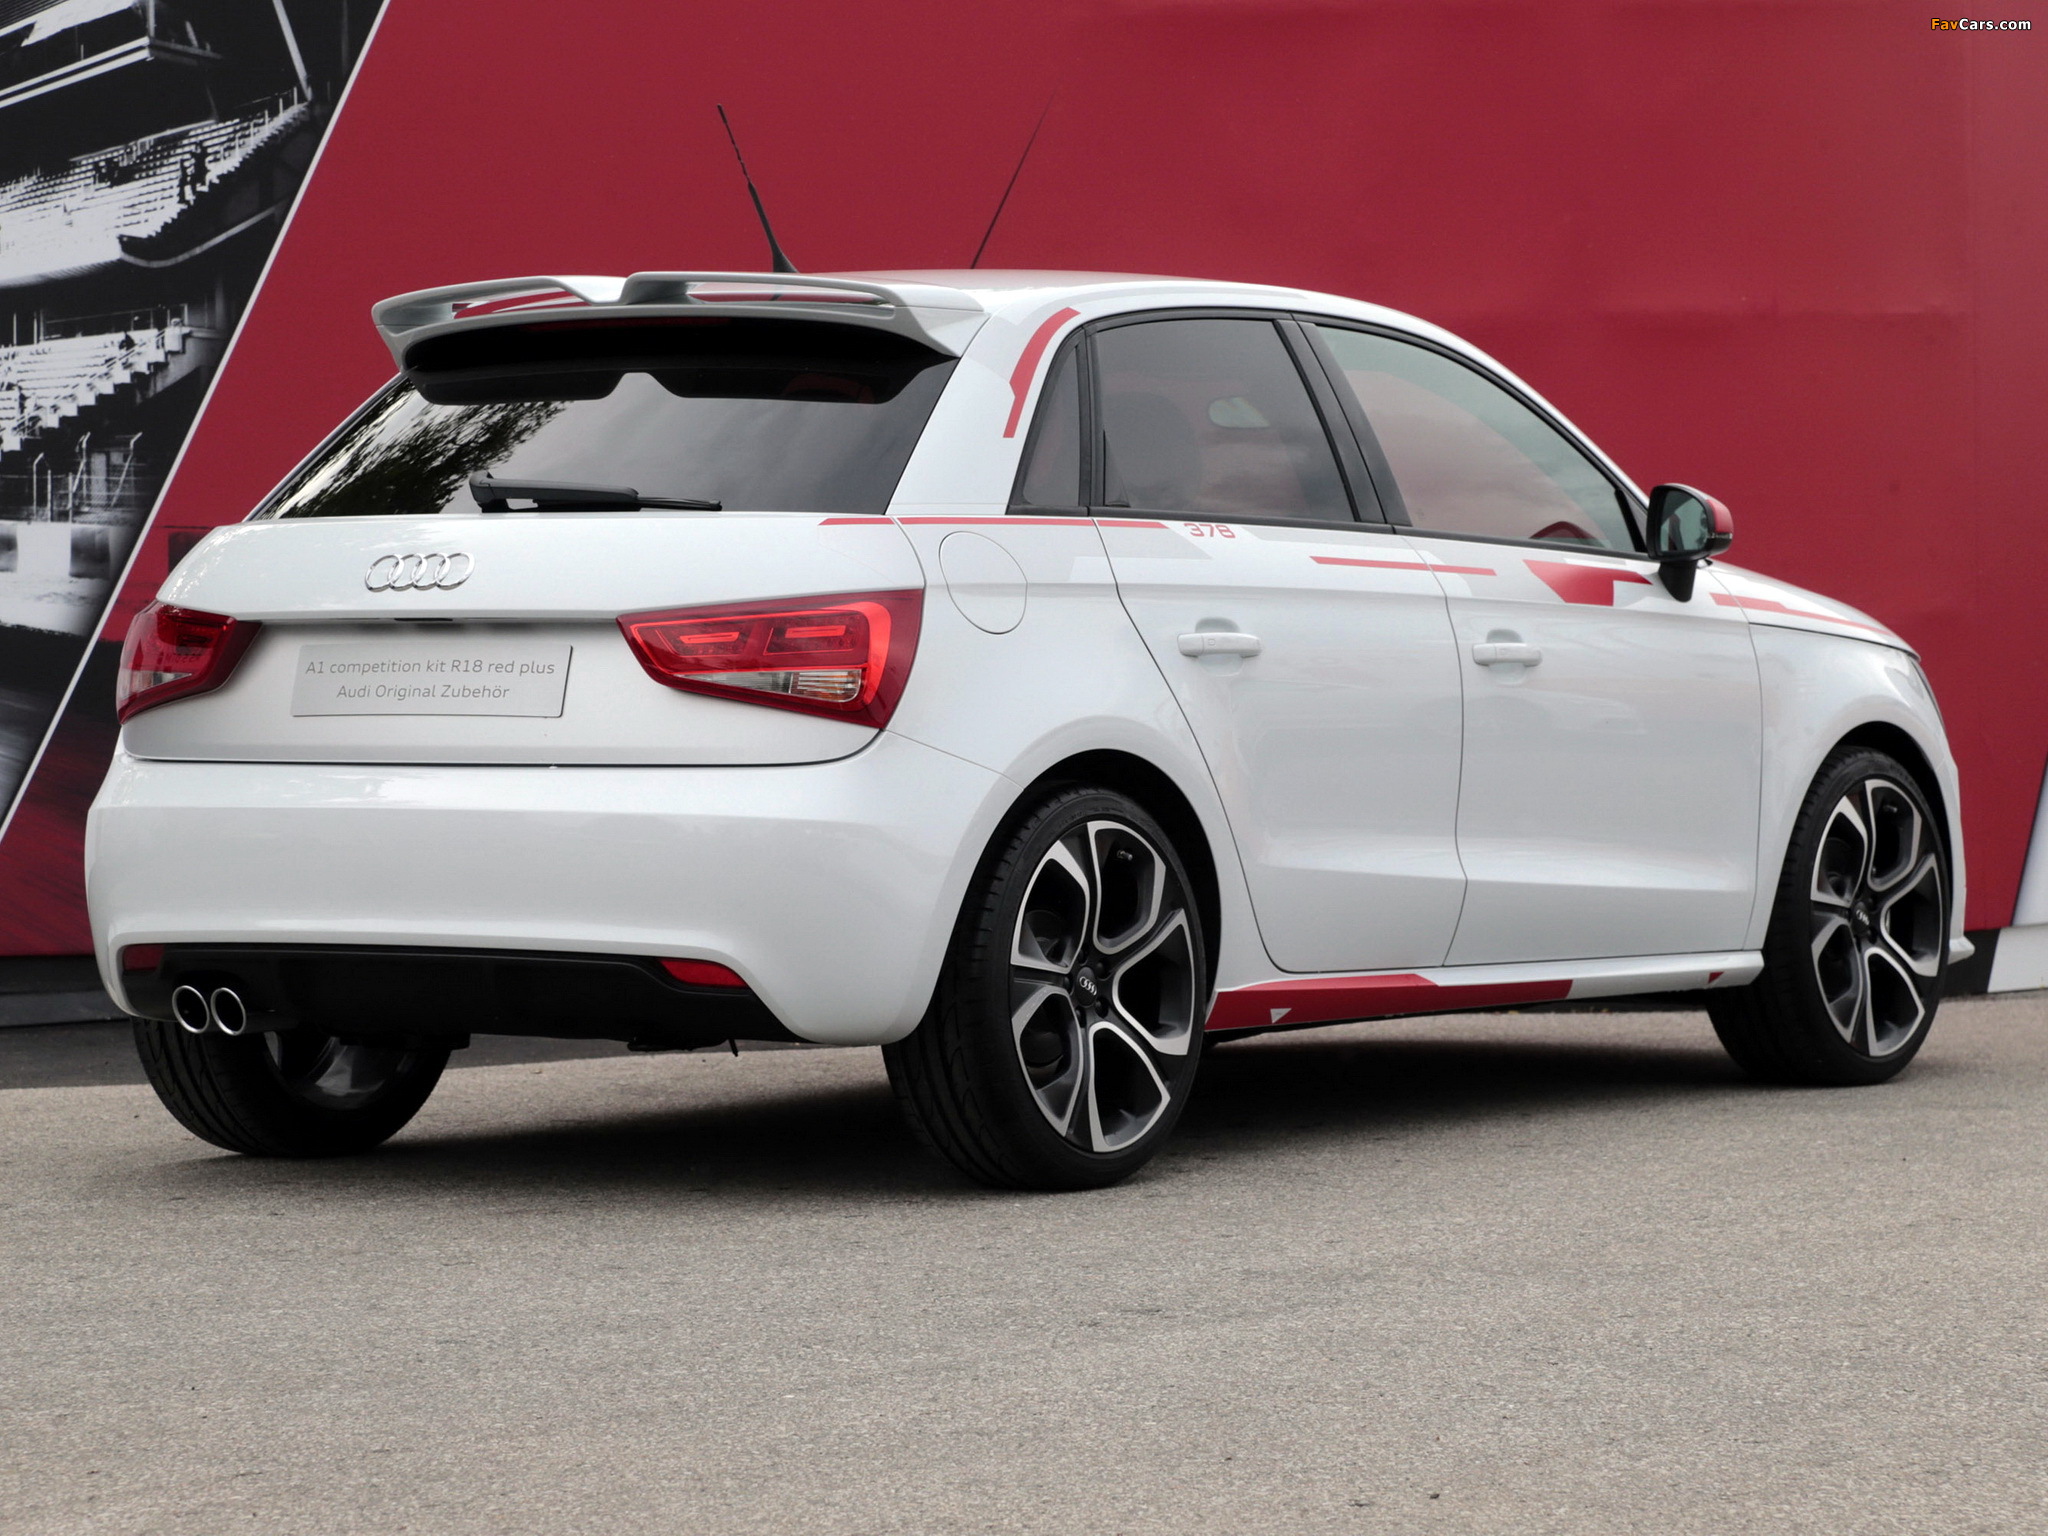 Audi A1 Sportback Competition Kit R18 Red Plus (8X) 2013 images (2048 x 1536)